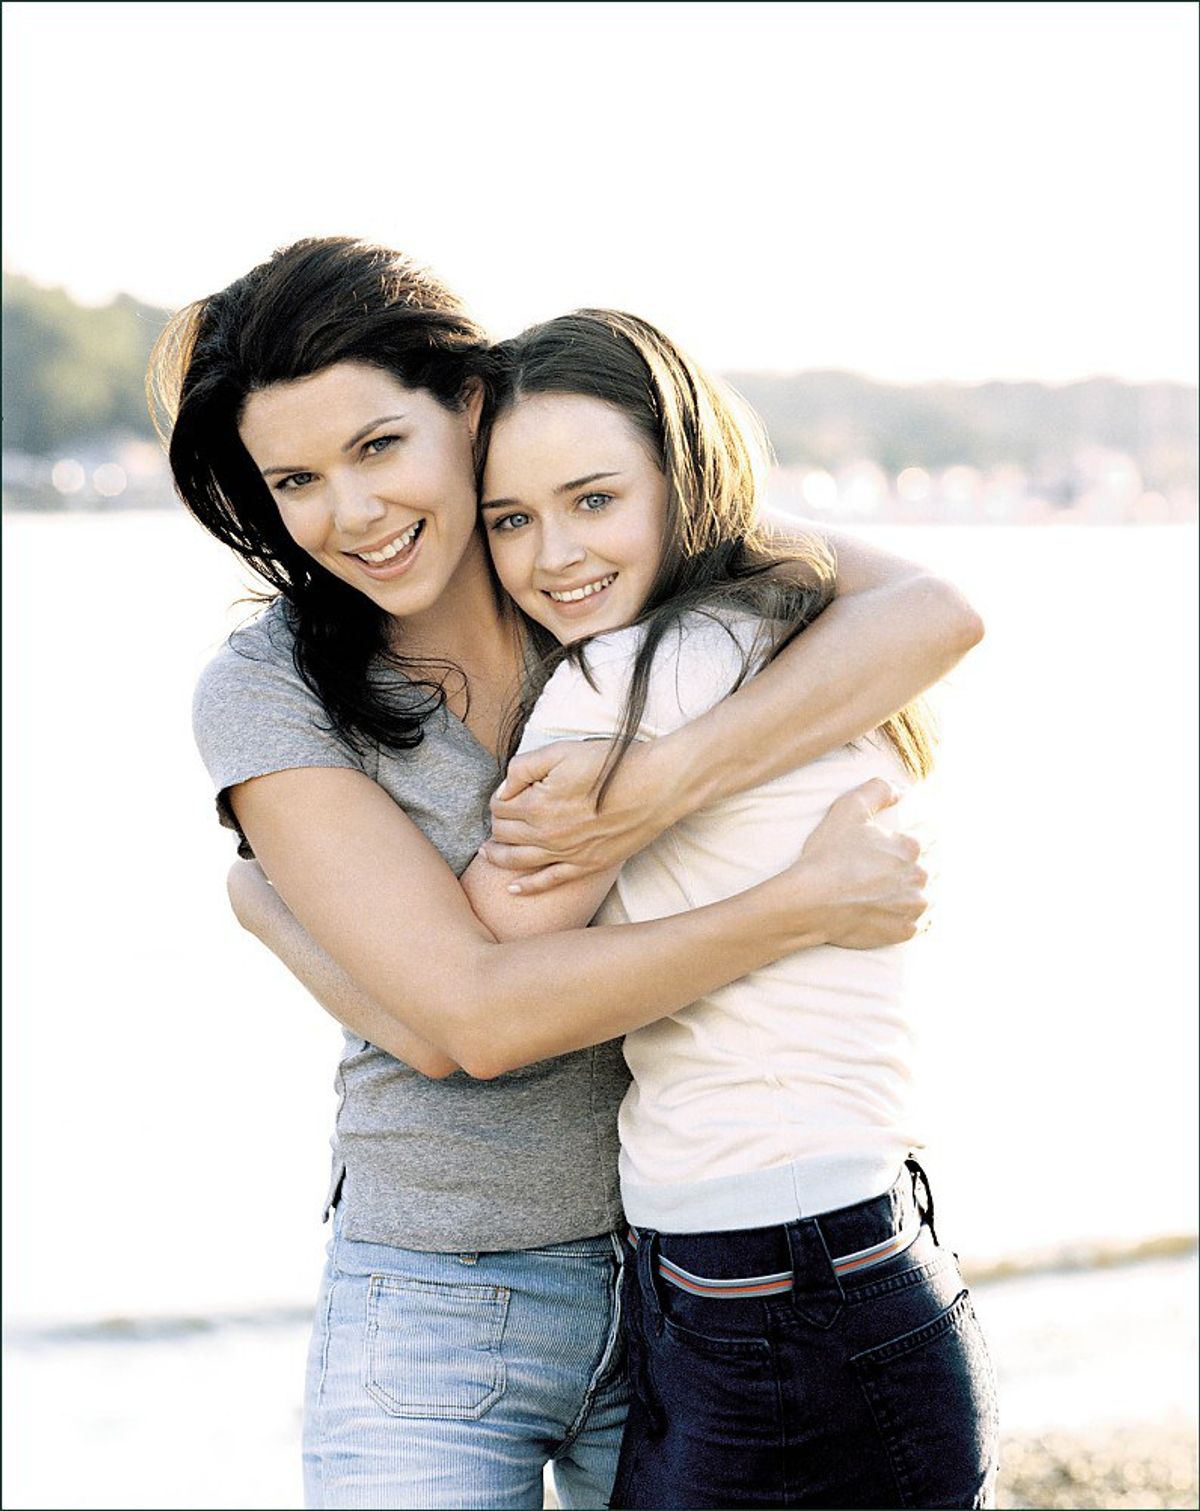 7 Life Tips Gilmore Girls Taught Us